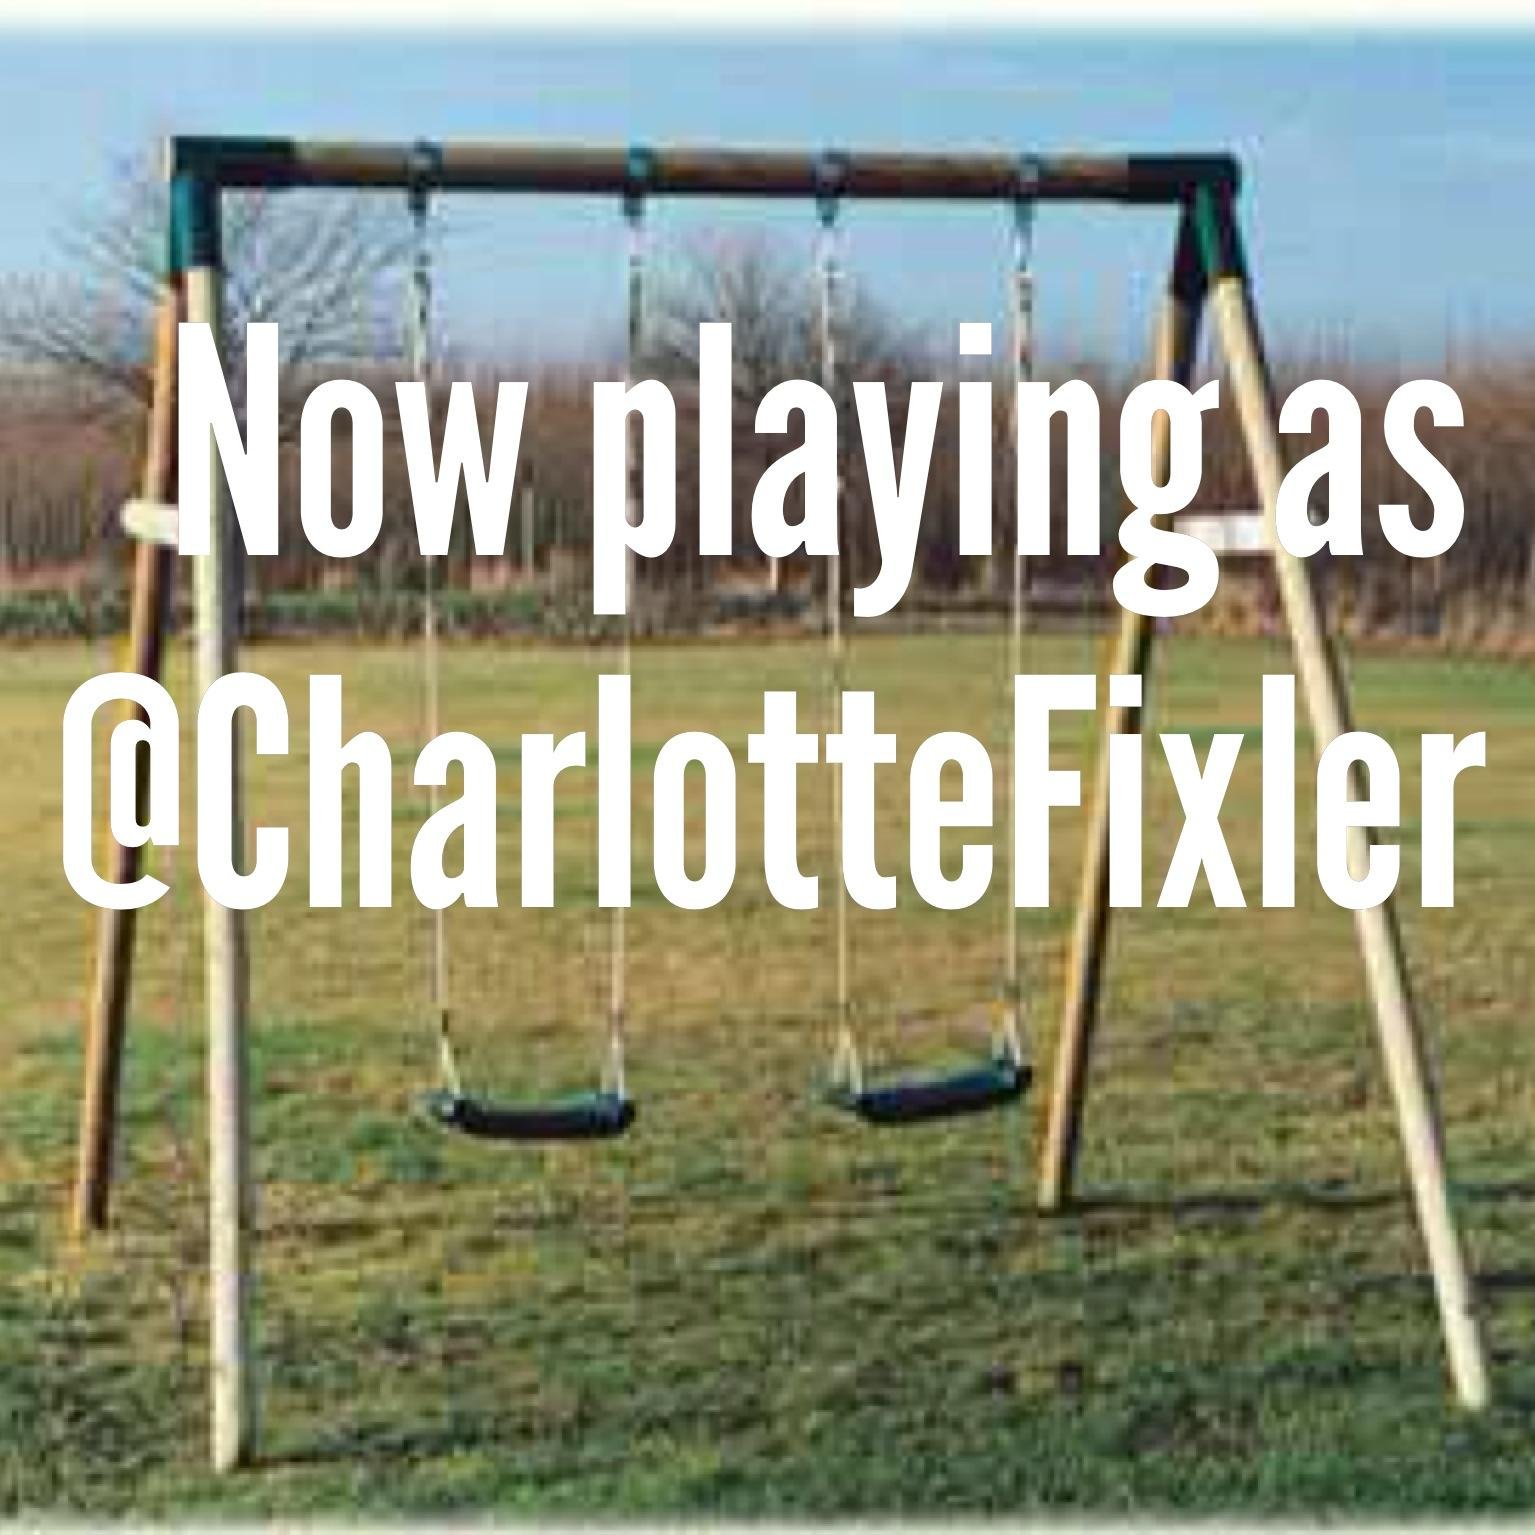 Now tweeting as... myself! Follow @CharlotteFixler for tweets on playful learning.